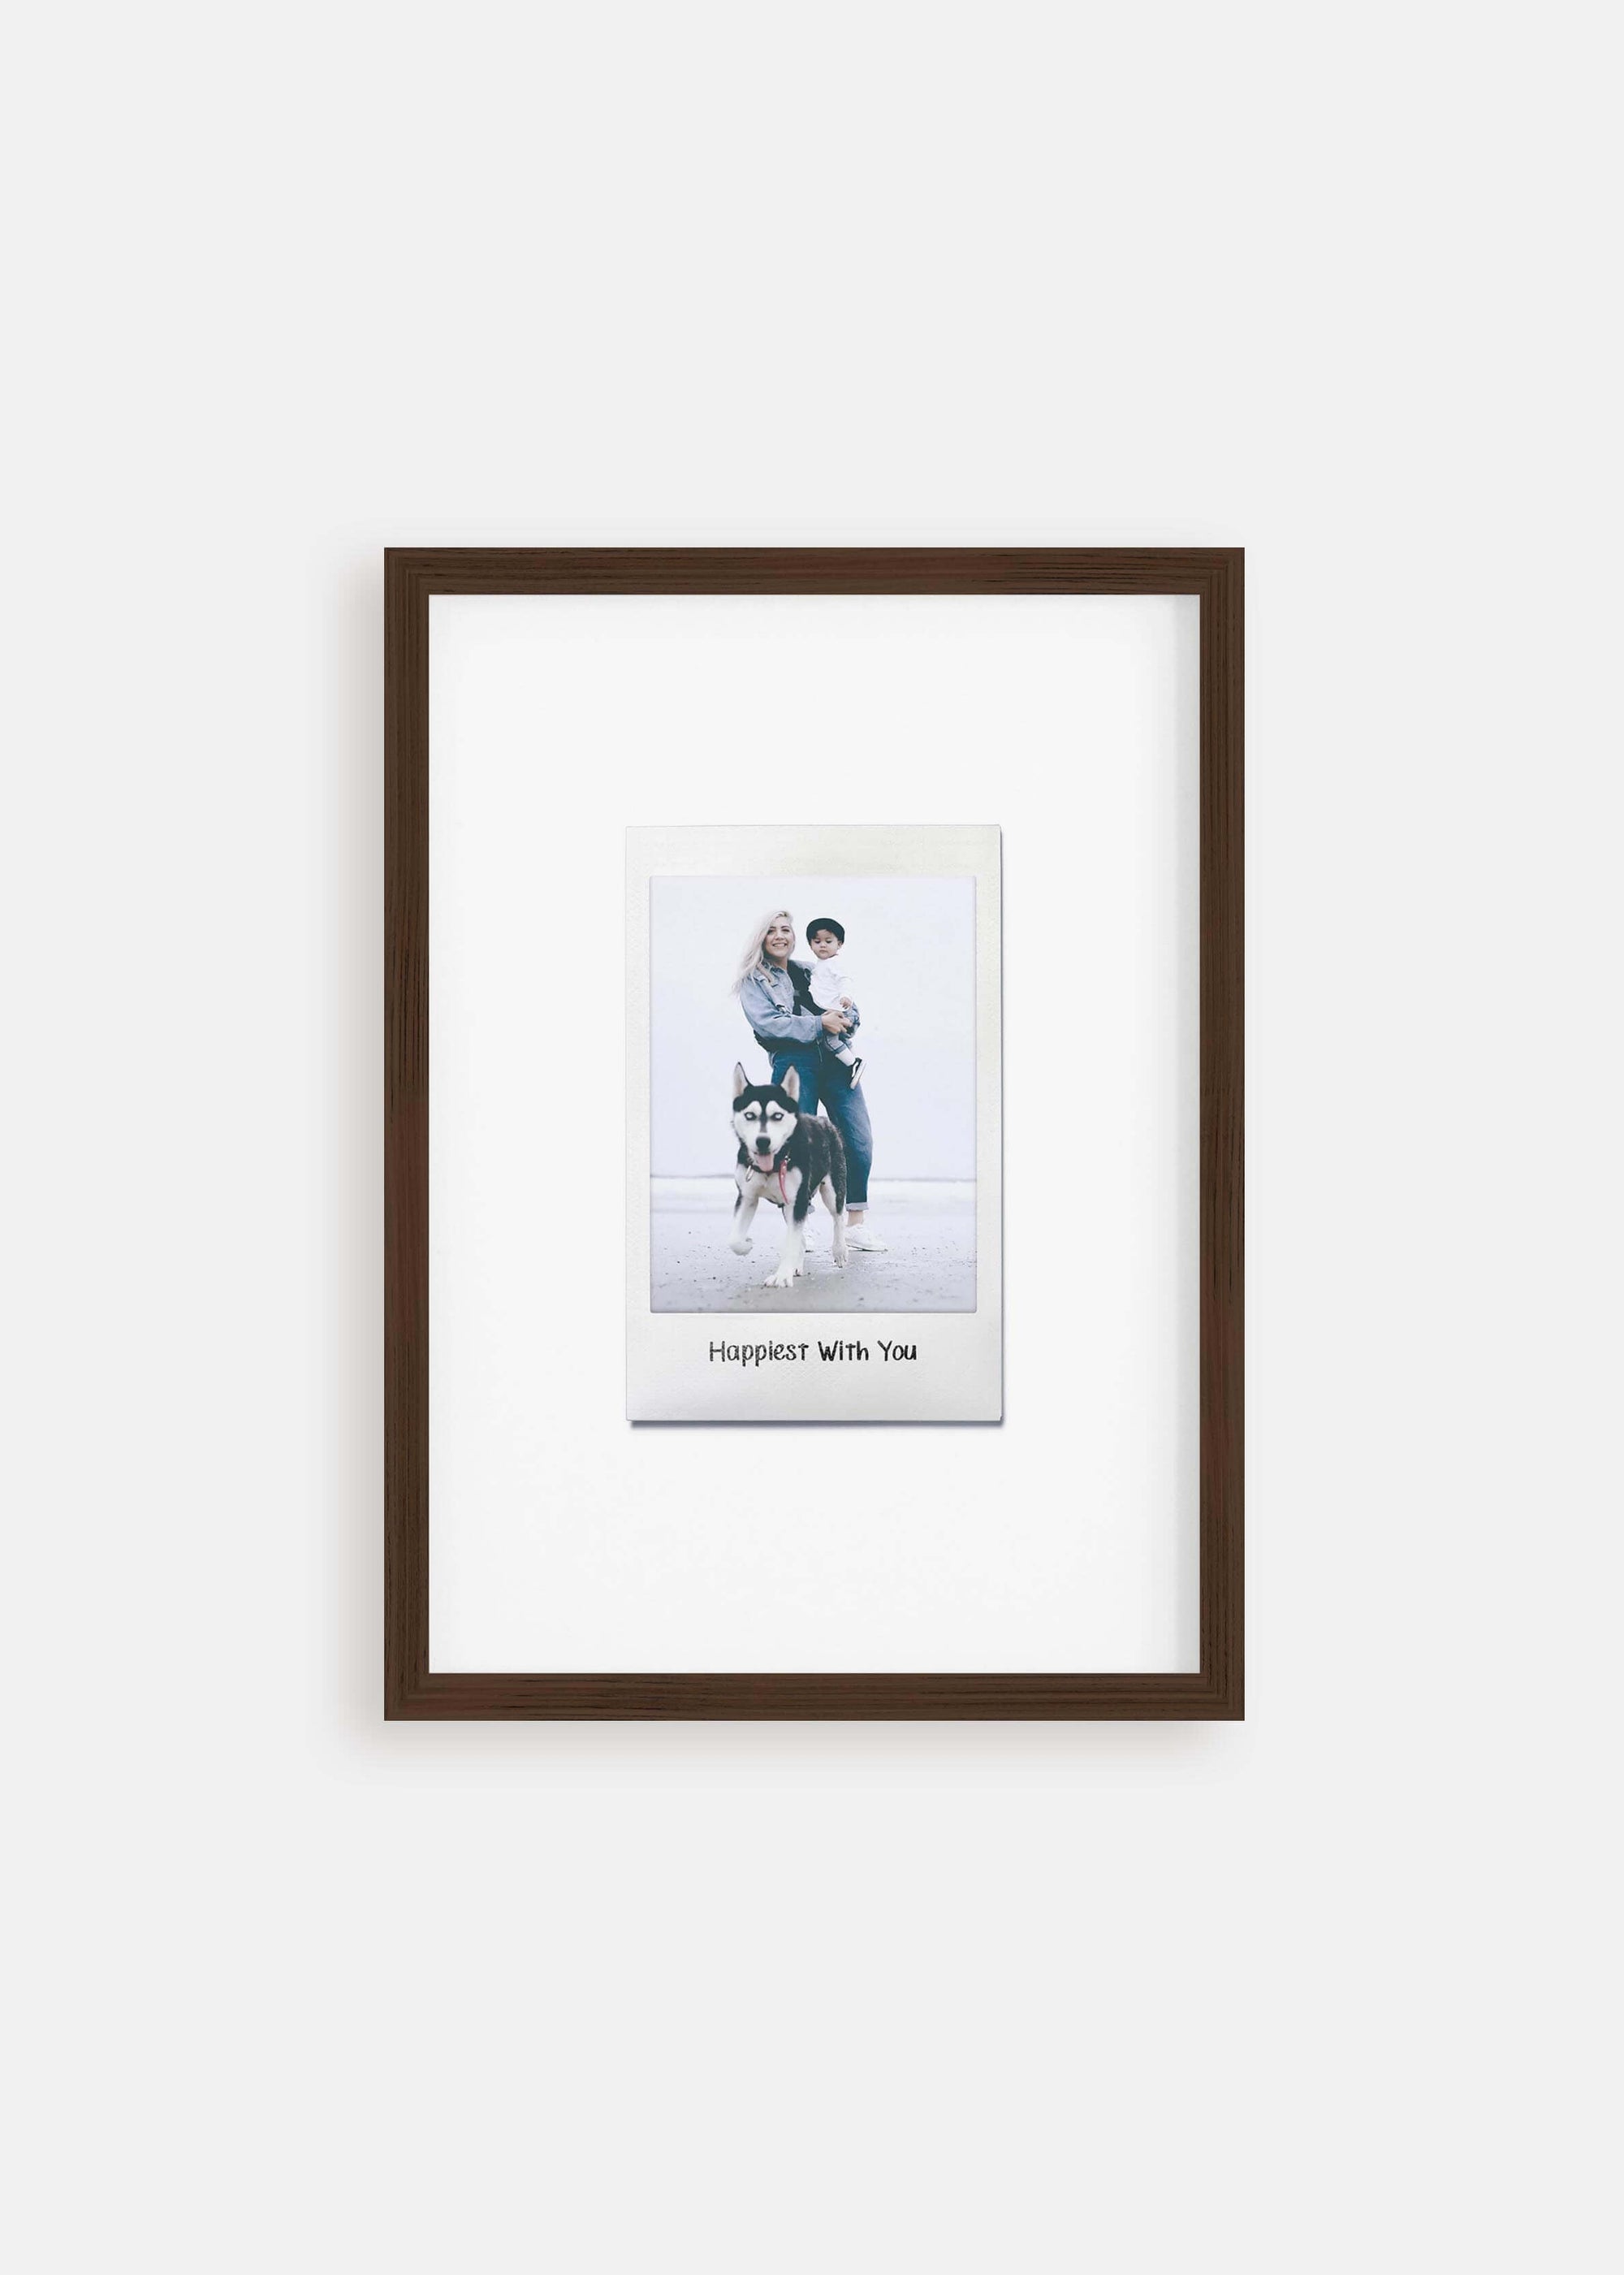 Personalized photo gift of a woman with her child and dog in a walnut frame in the style of a nostalgic instant film custom polaroid photo with frame on white background. The custom caption reads "Happiest with you".